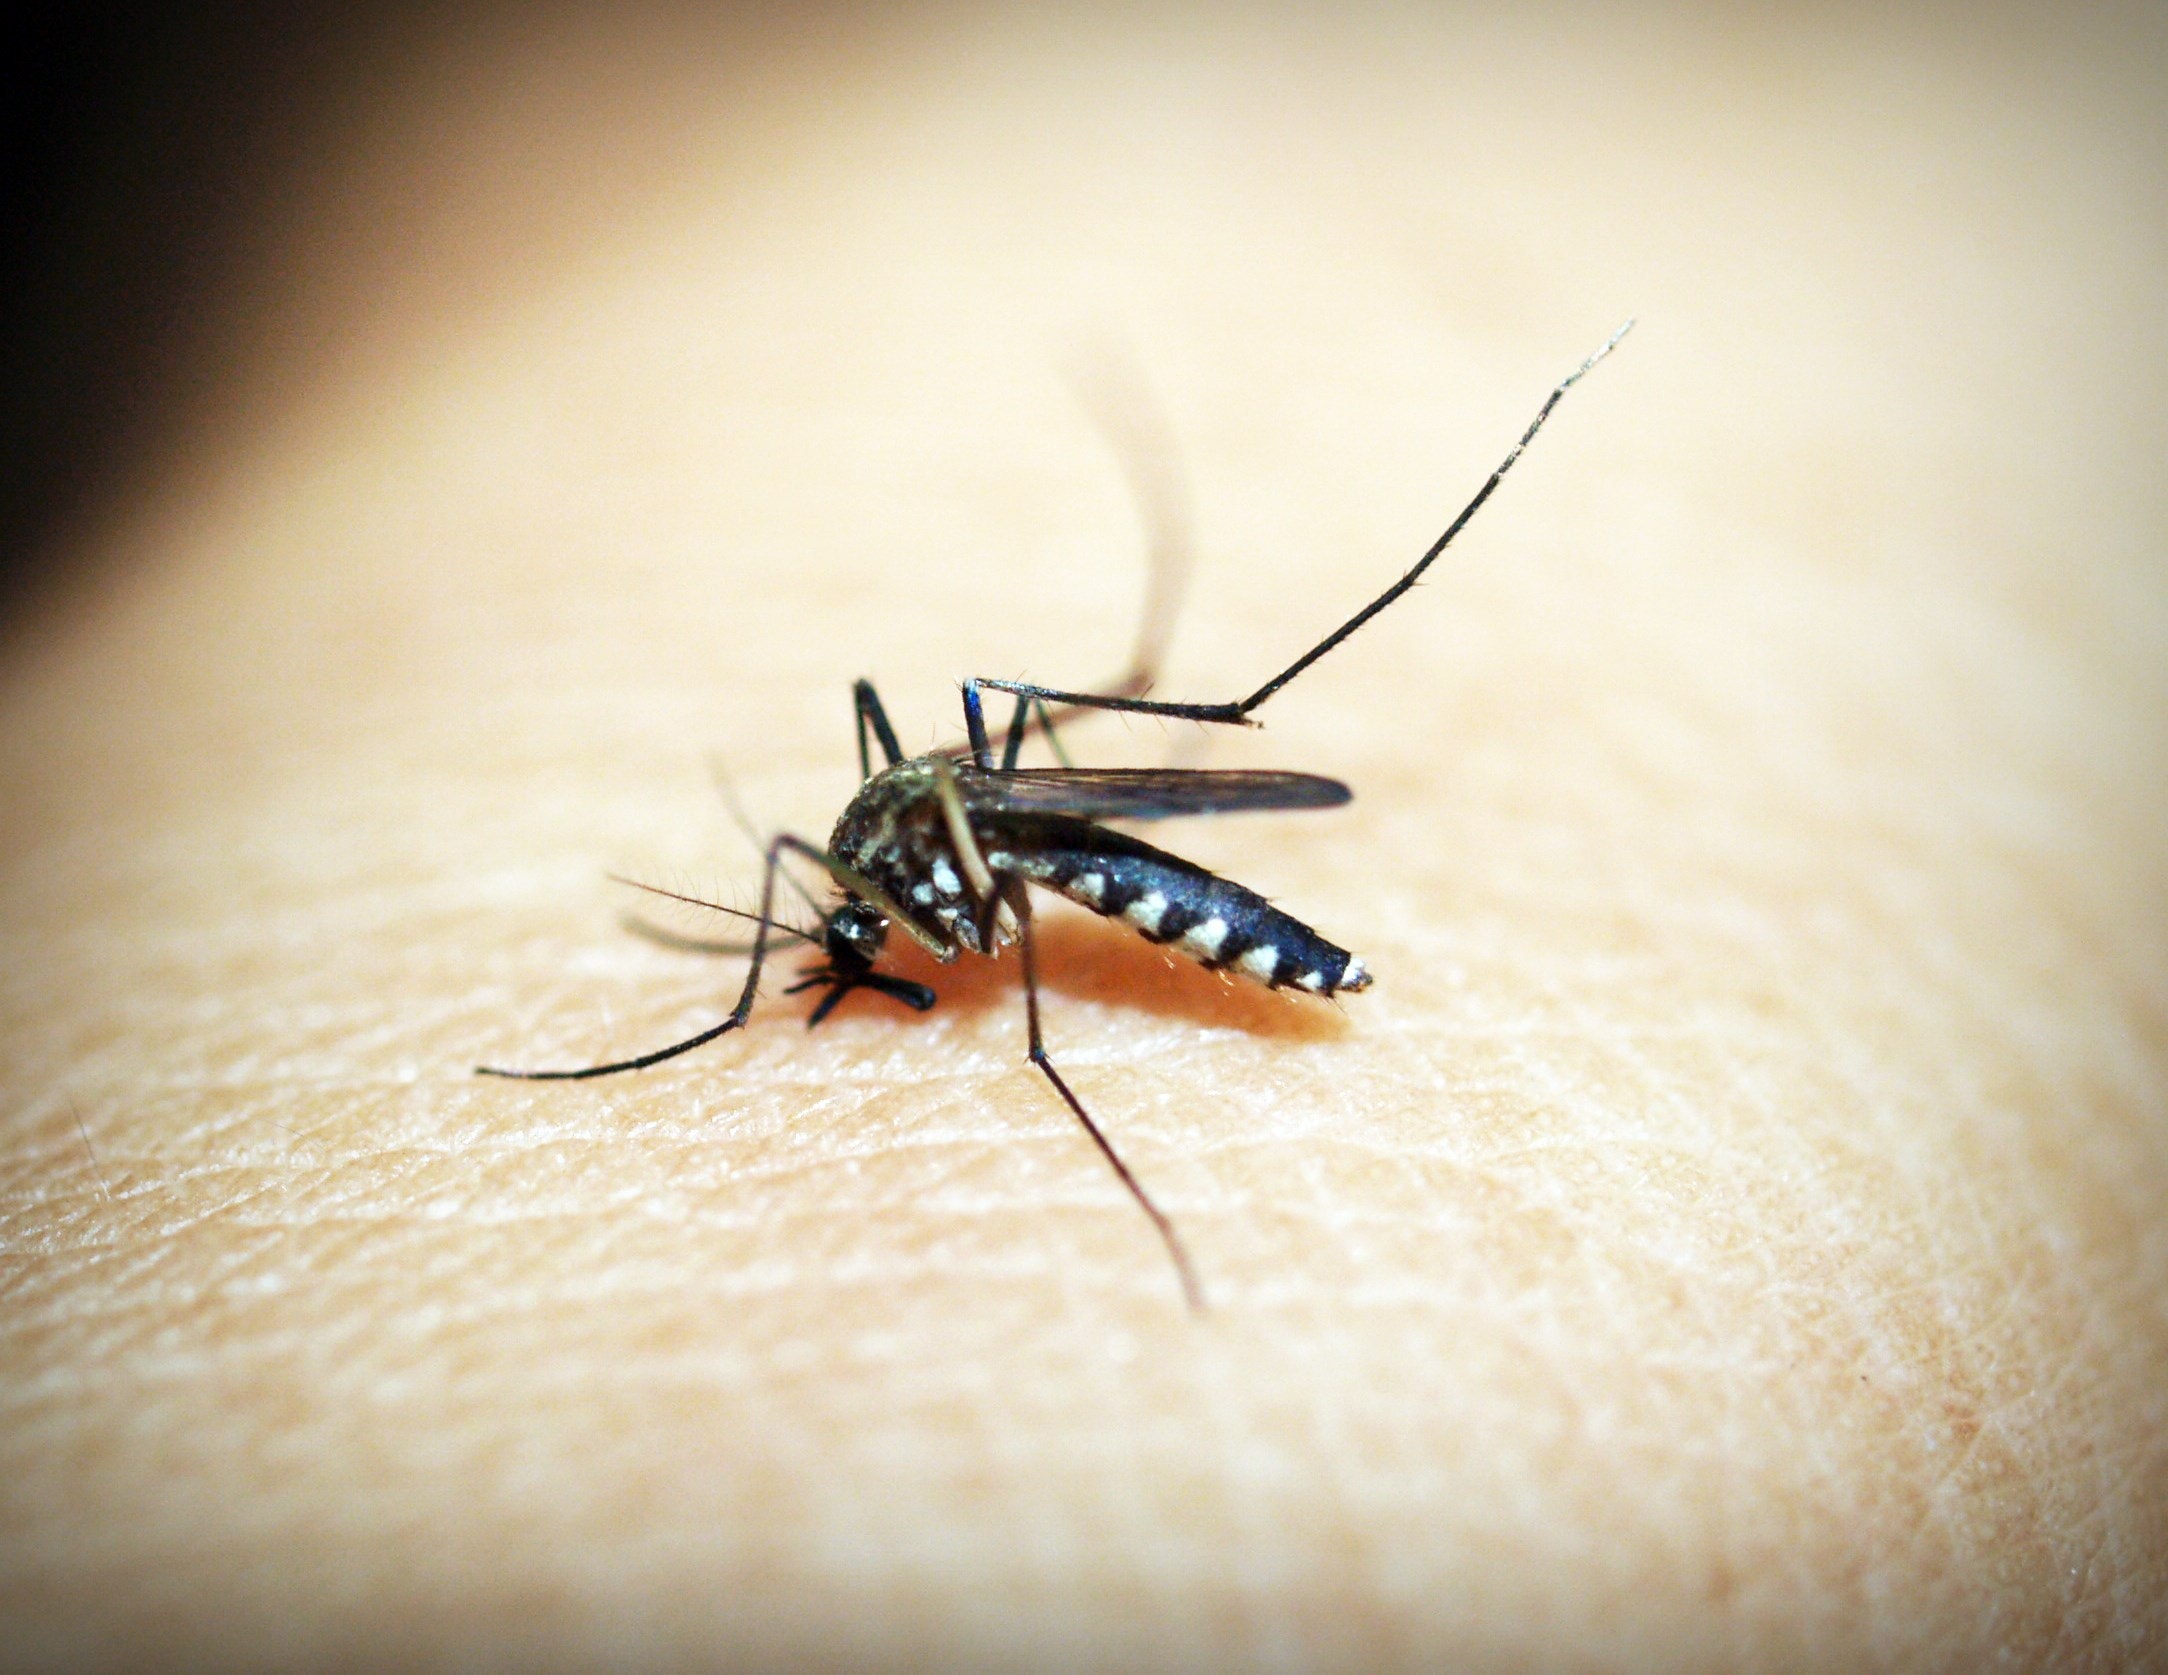 Dengue Virus Spreads Rapidly Through Florida, Prompting Health Official Alarm